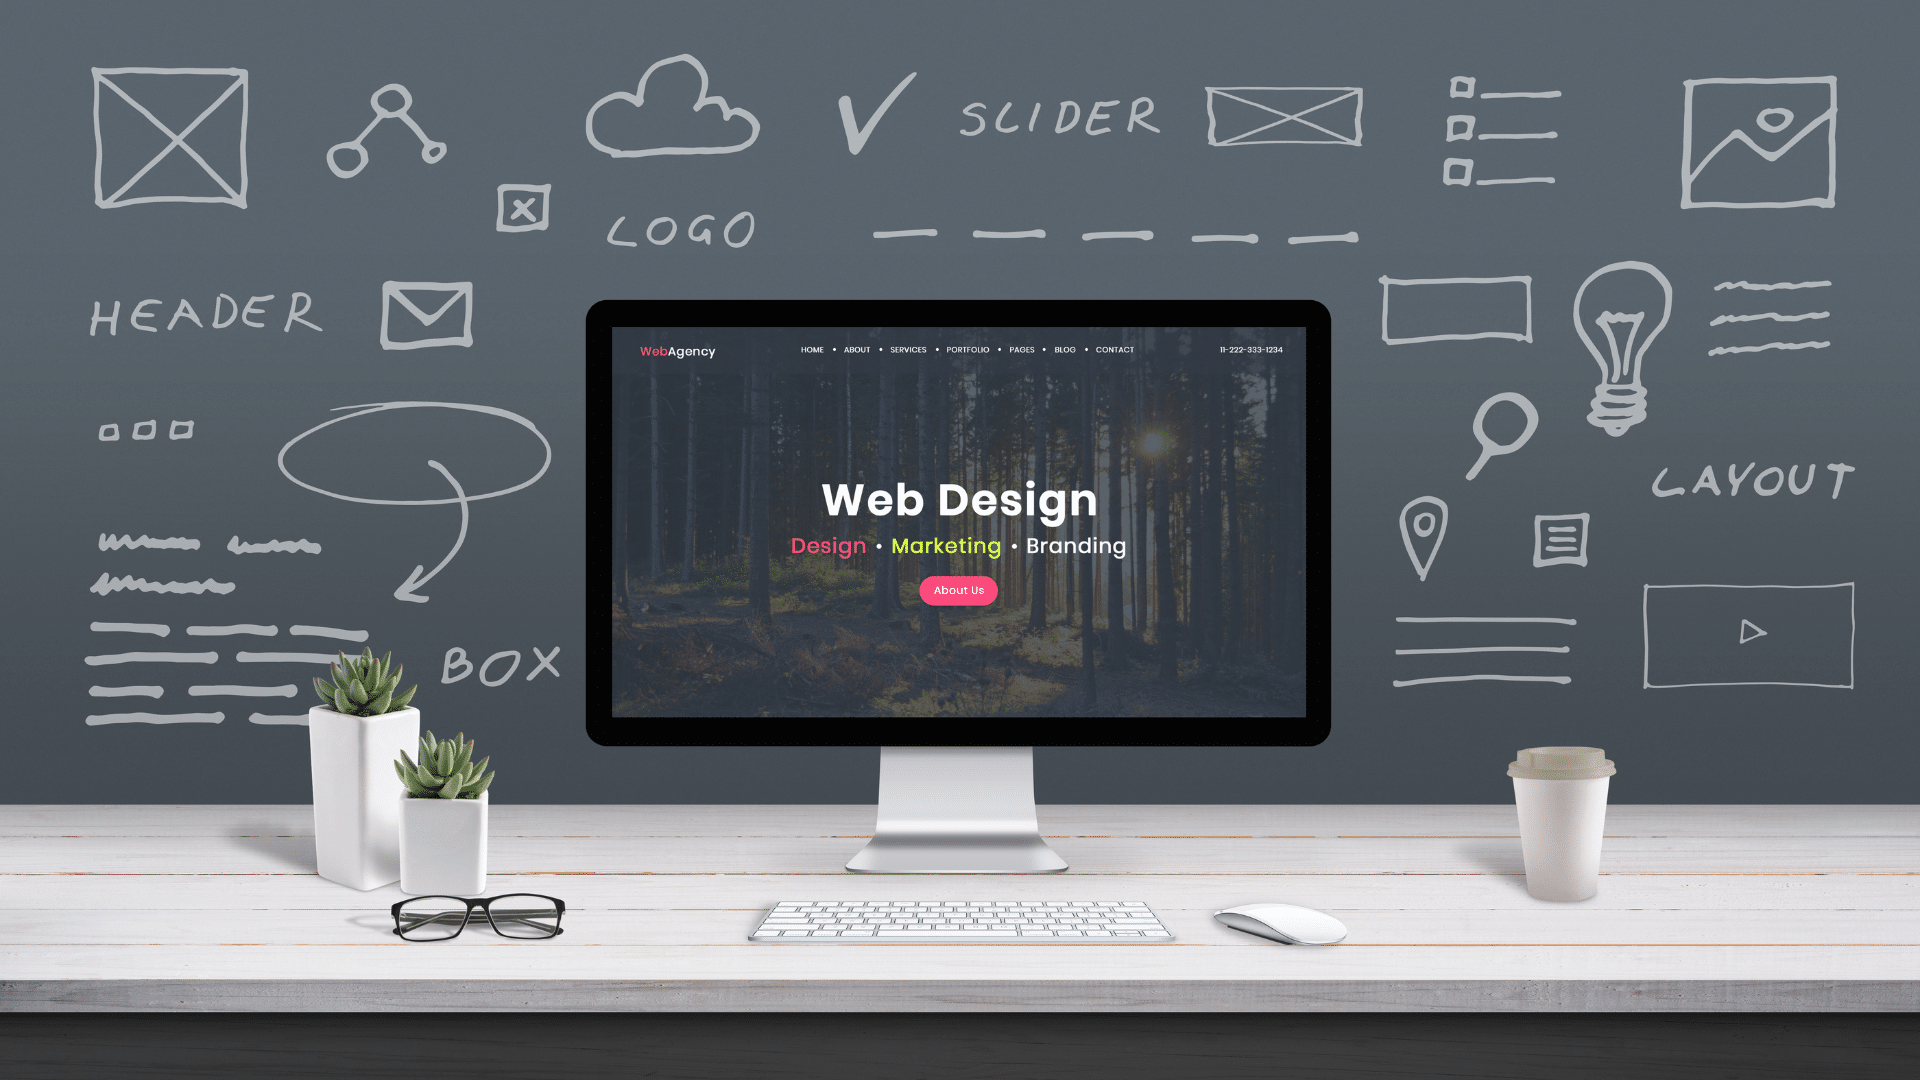 Website Design Concept - Website Dos and Don’ts: Top TIPS FOR A CONVERTING WEBSITE